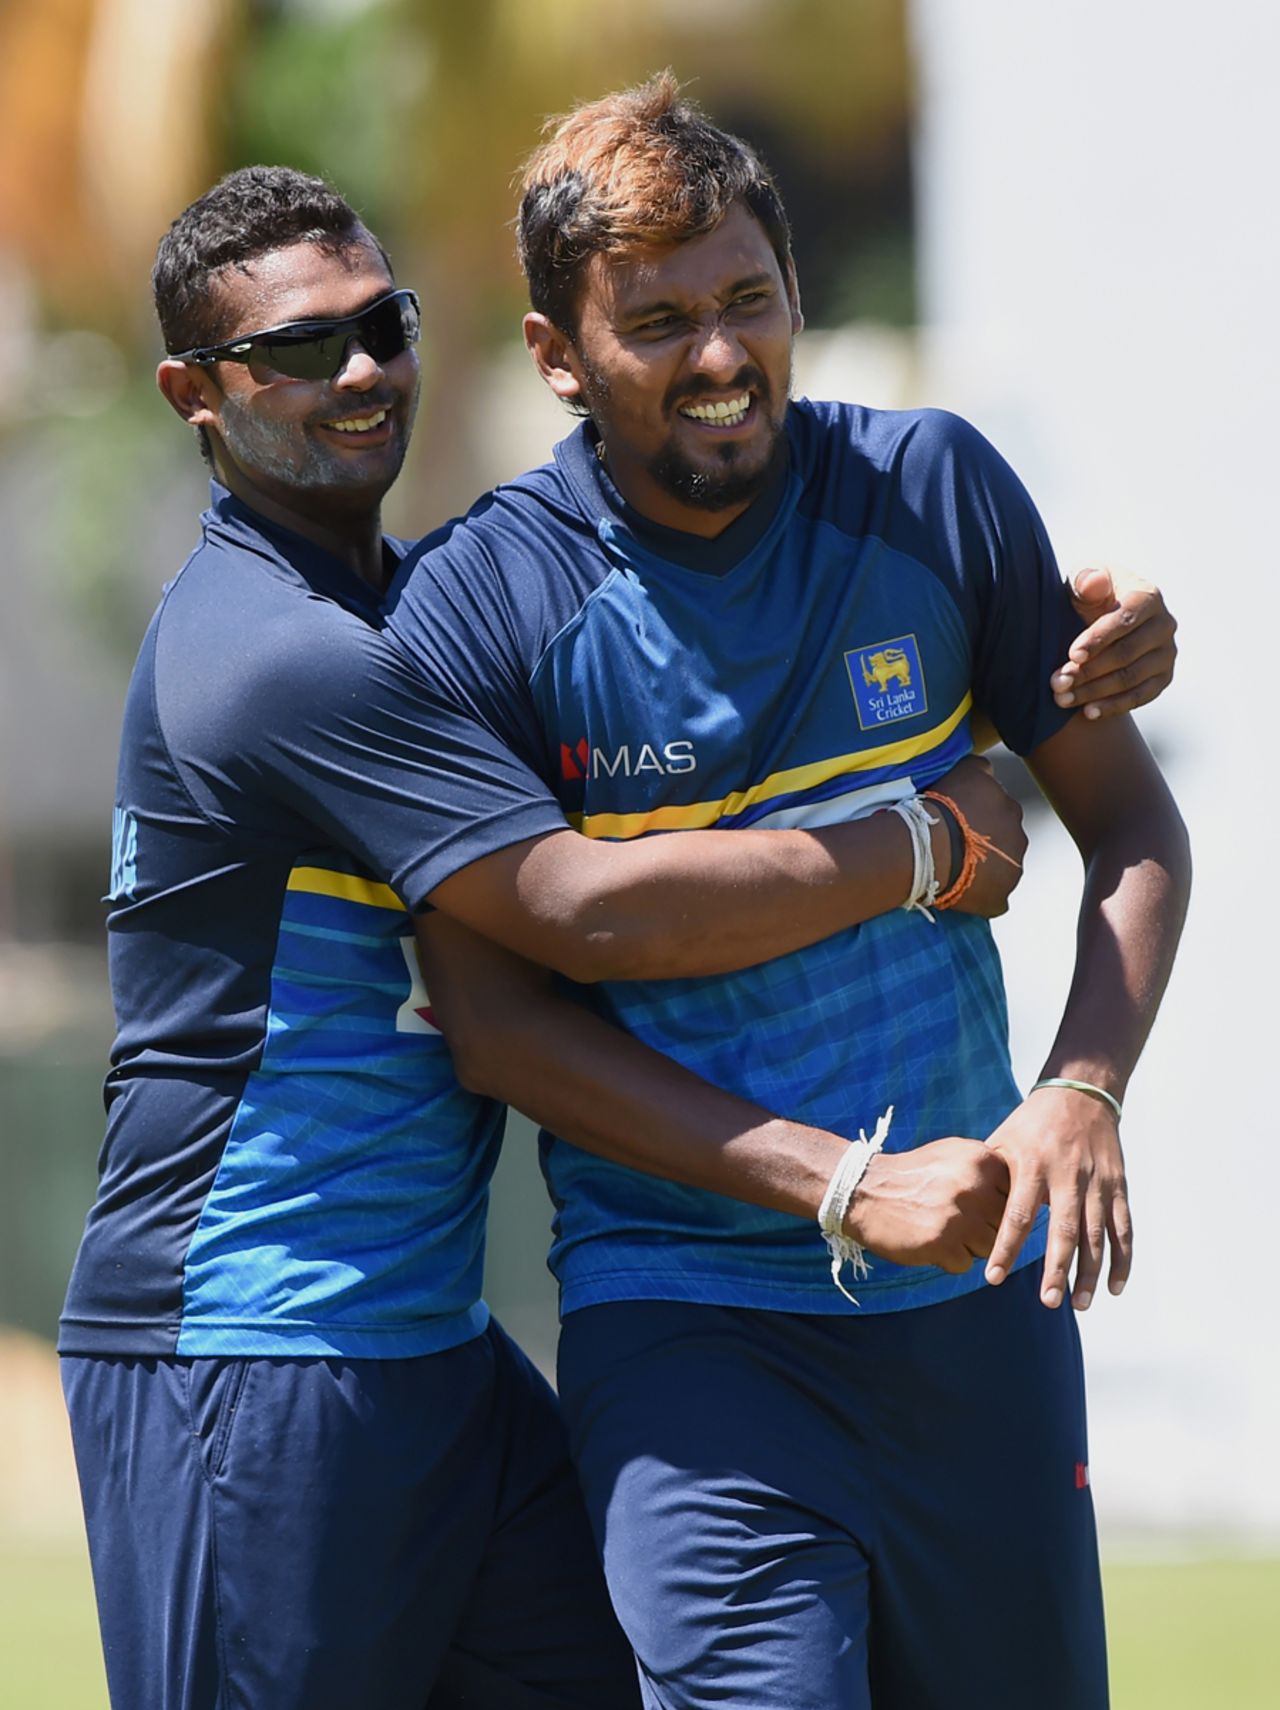 Asela Gunaratne (L) and Suranga Lakmal have a good laugh in between training, Colombo, March 13, 2017